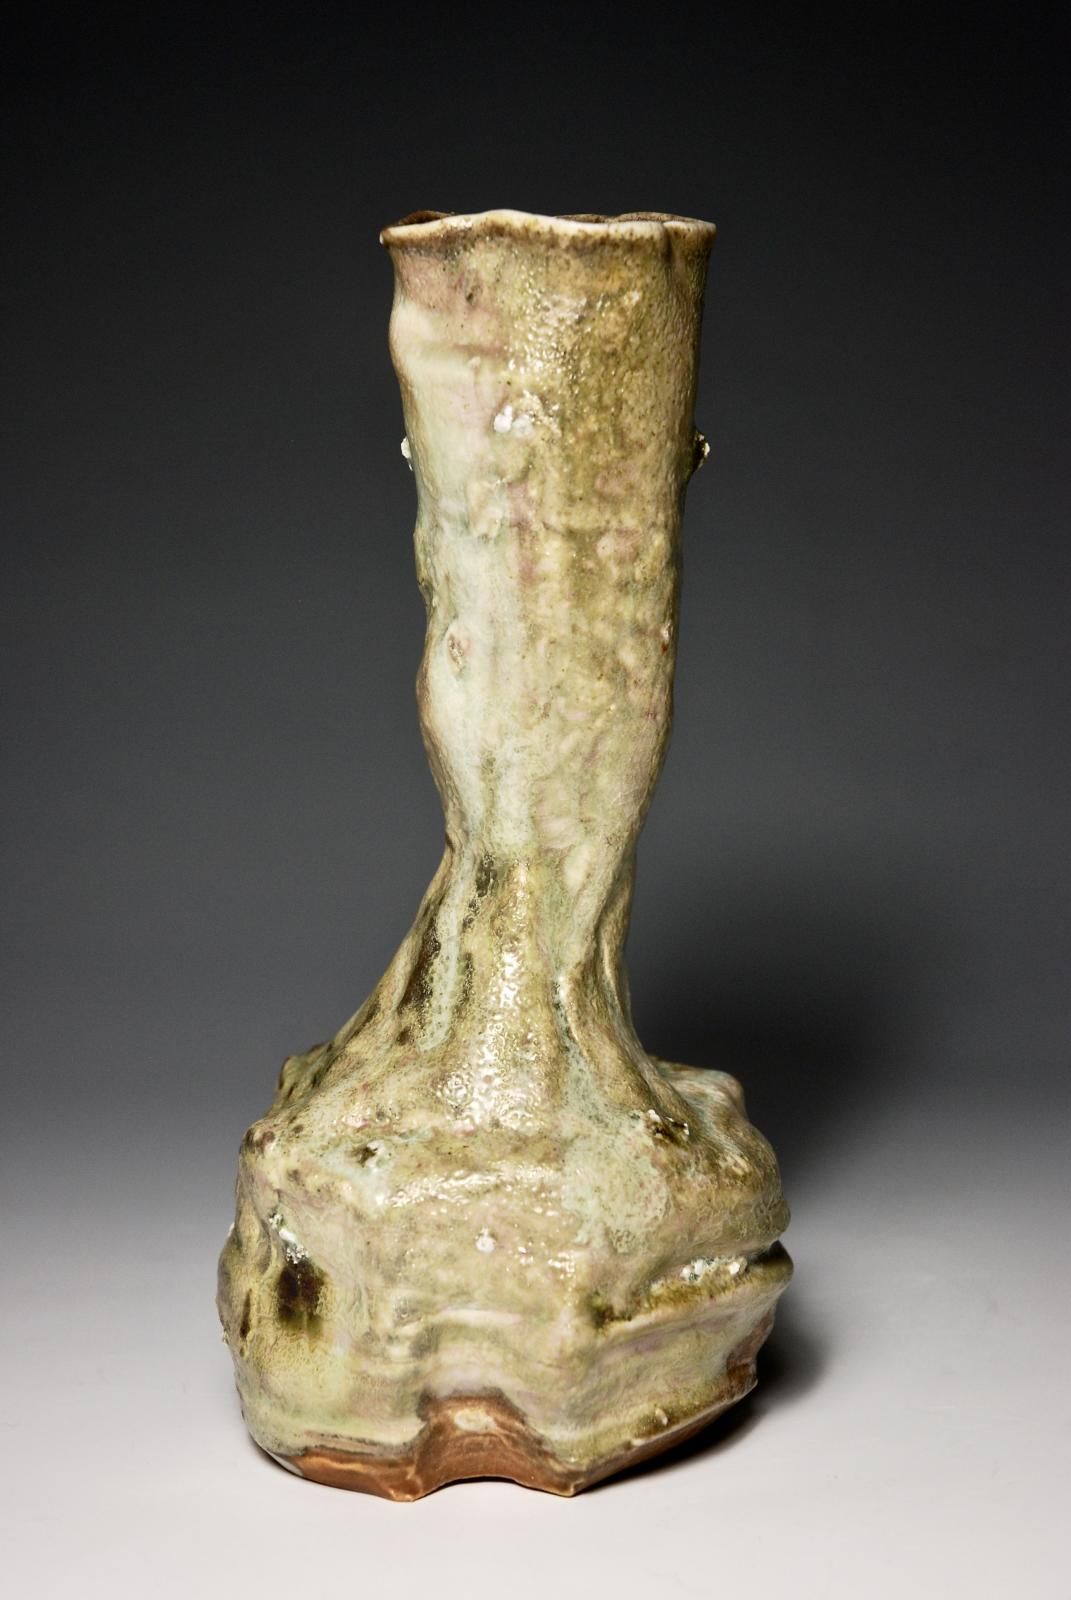 Individual Pourer.  Slow Thrown in two parts, hand assemble and manipulated with a trimmed foot.  Porcelain Body with locally sourced indeignous rock grits.  Celadon Glaze with varying ash Patternation.  Anagama Fired. by Sim Taylor